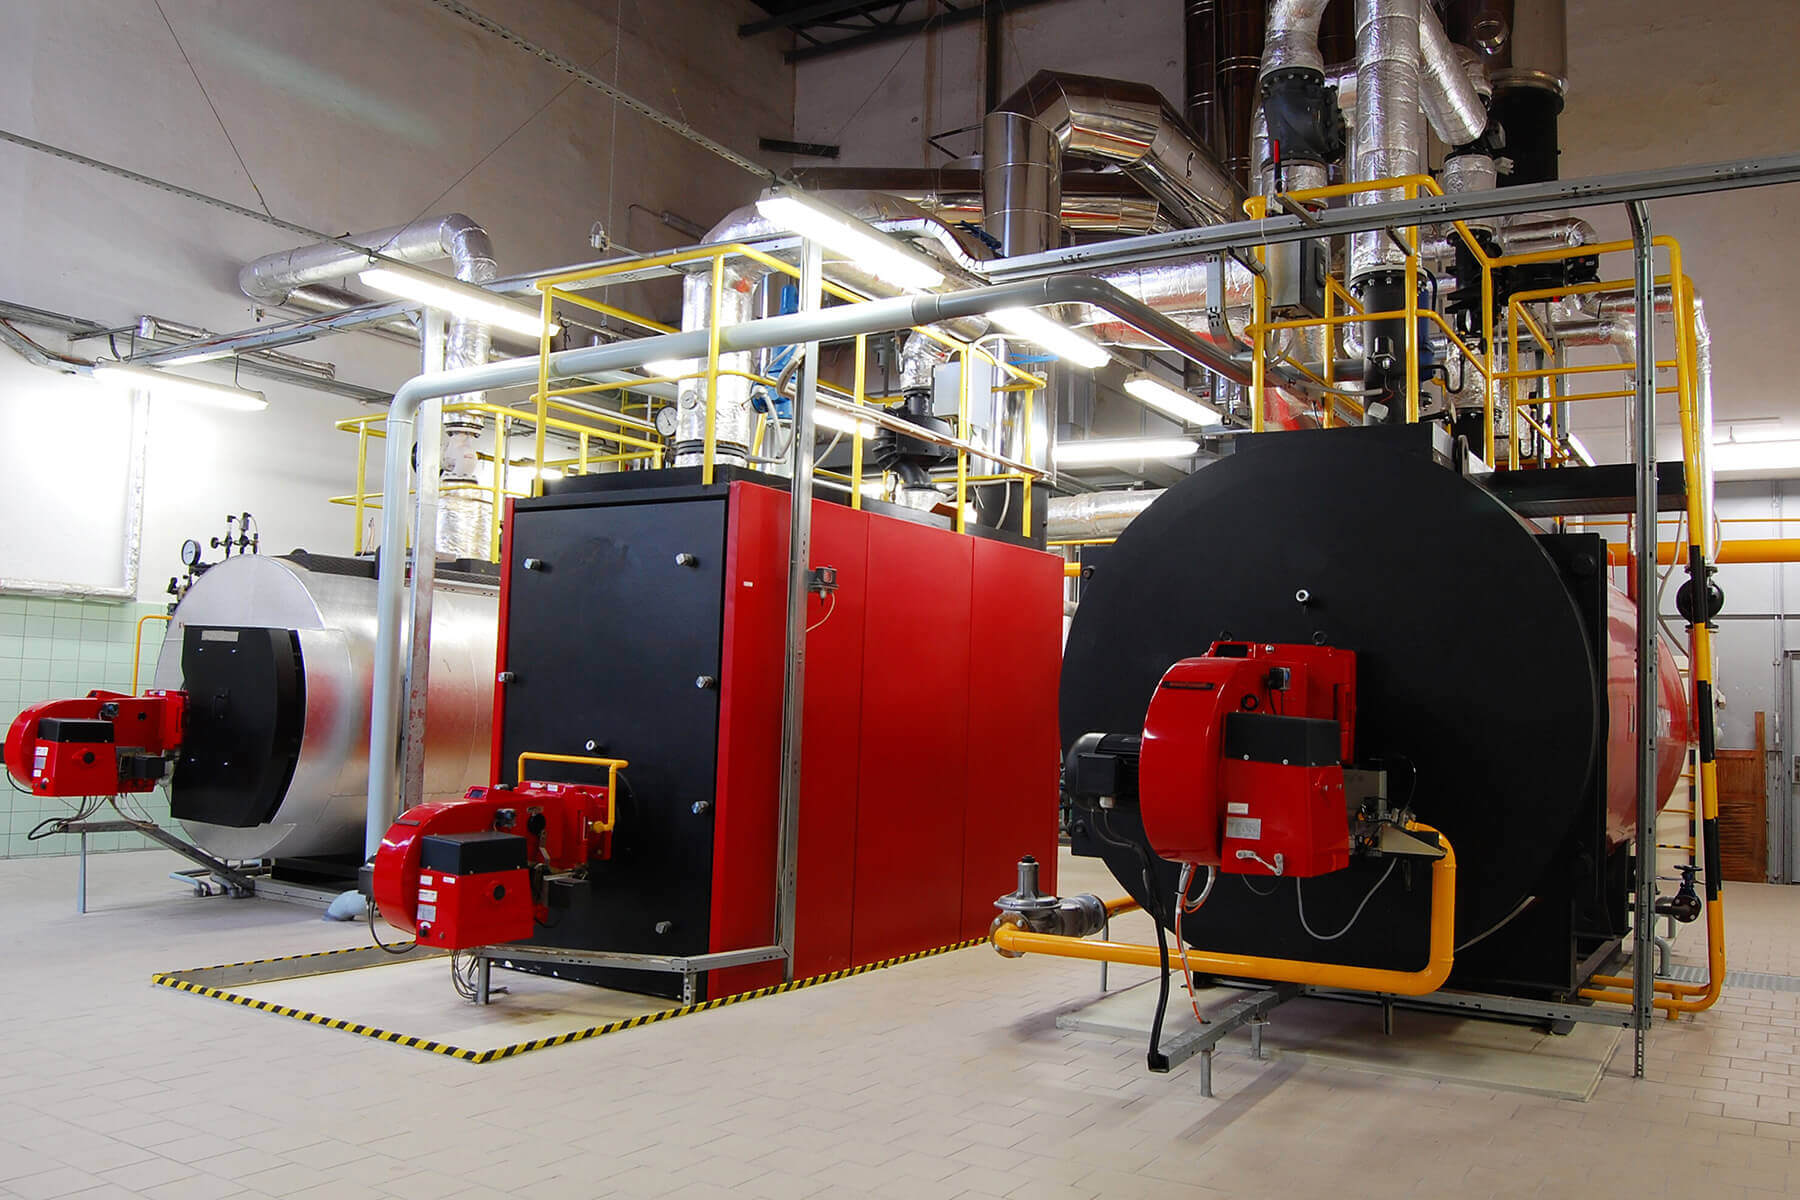 Our engineers are fully trained to all current standards, to service industrial boilers